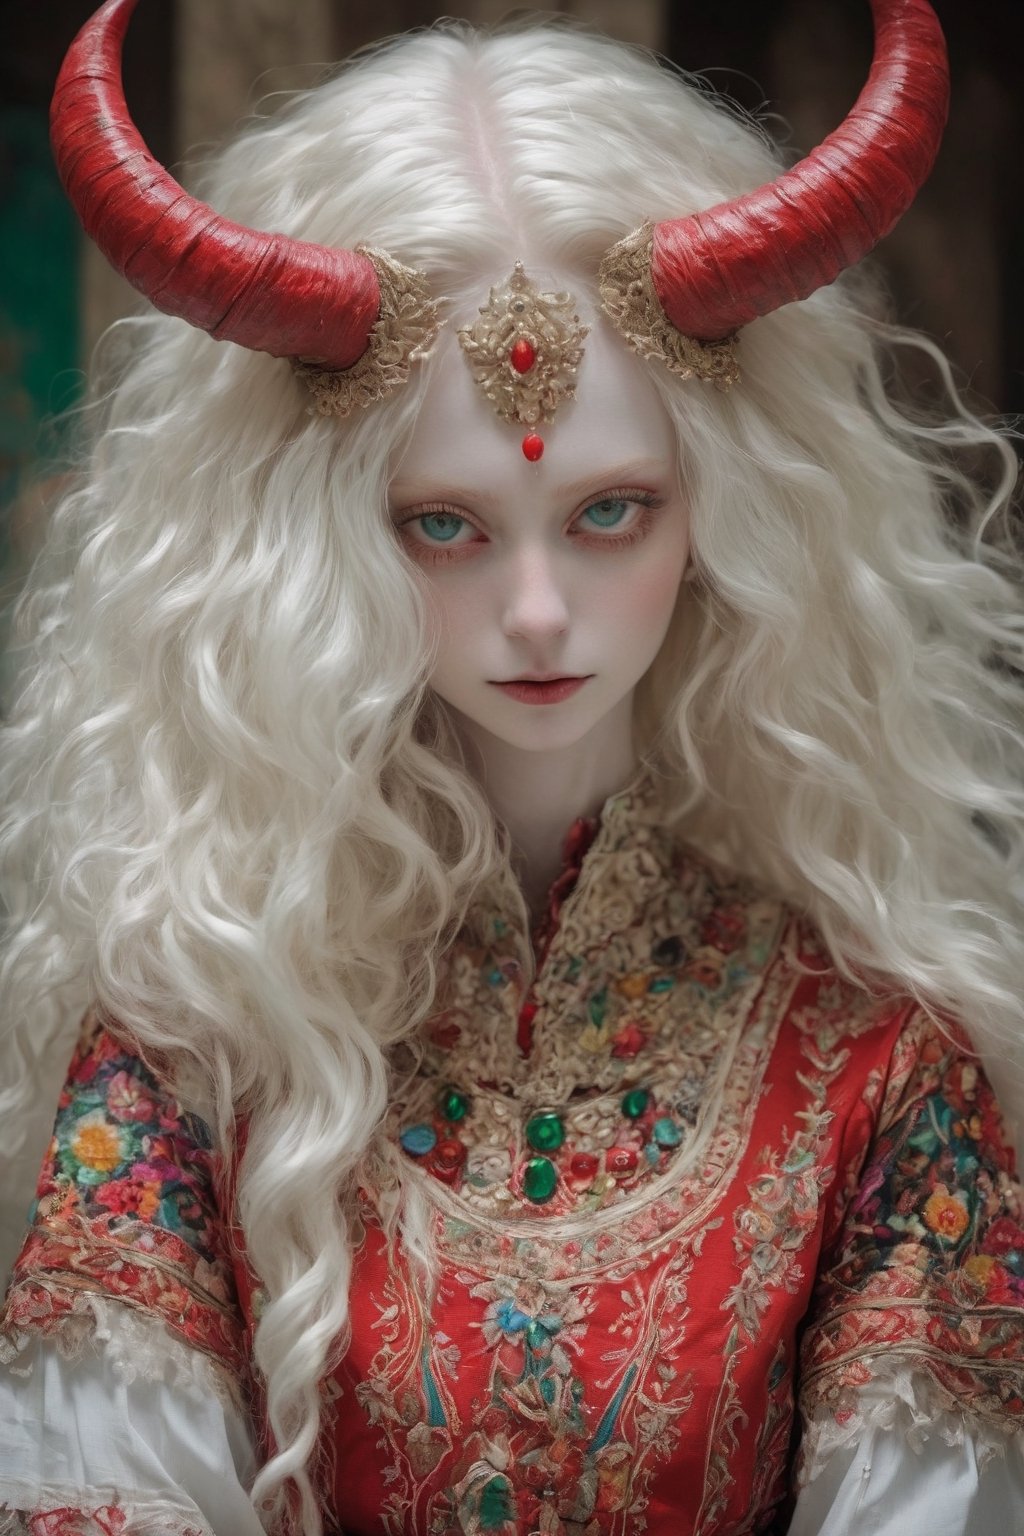 An albino devil girl (long intricate horns:1.2) in traditional Persian costume, endlessly beautiful emerald eyes, her ethereal presence accentuated by the transparency of her pale skin, her striking red eyes radiating an otherworldly glow,
Break
Wrapped in the vibrant colors and intricate designs of her artistically embroidered blouse, colorful skirt, apron, and Sardinian folk costume in red and white tones, she exudes an enchanting allure that transcends the realms of fantasy and reality,photo_b00ster,dal